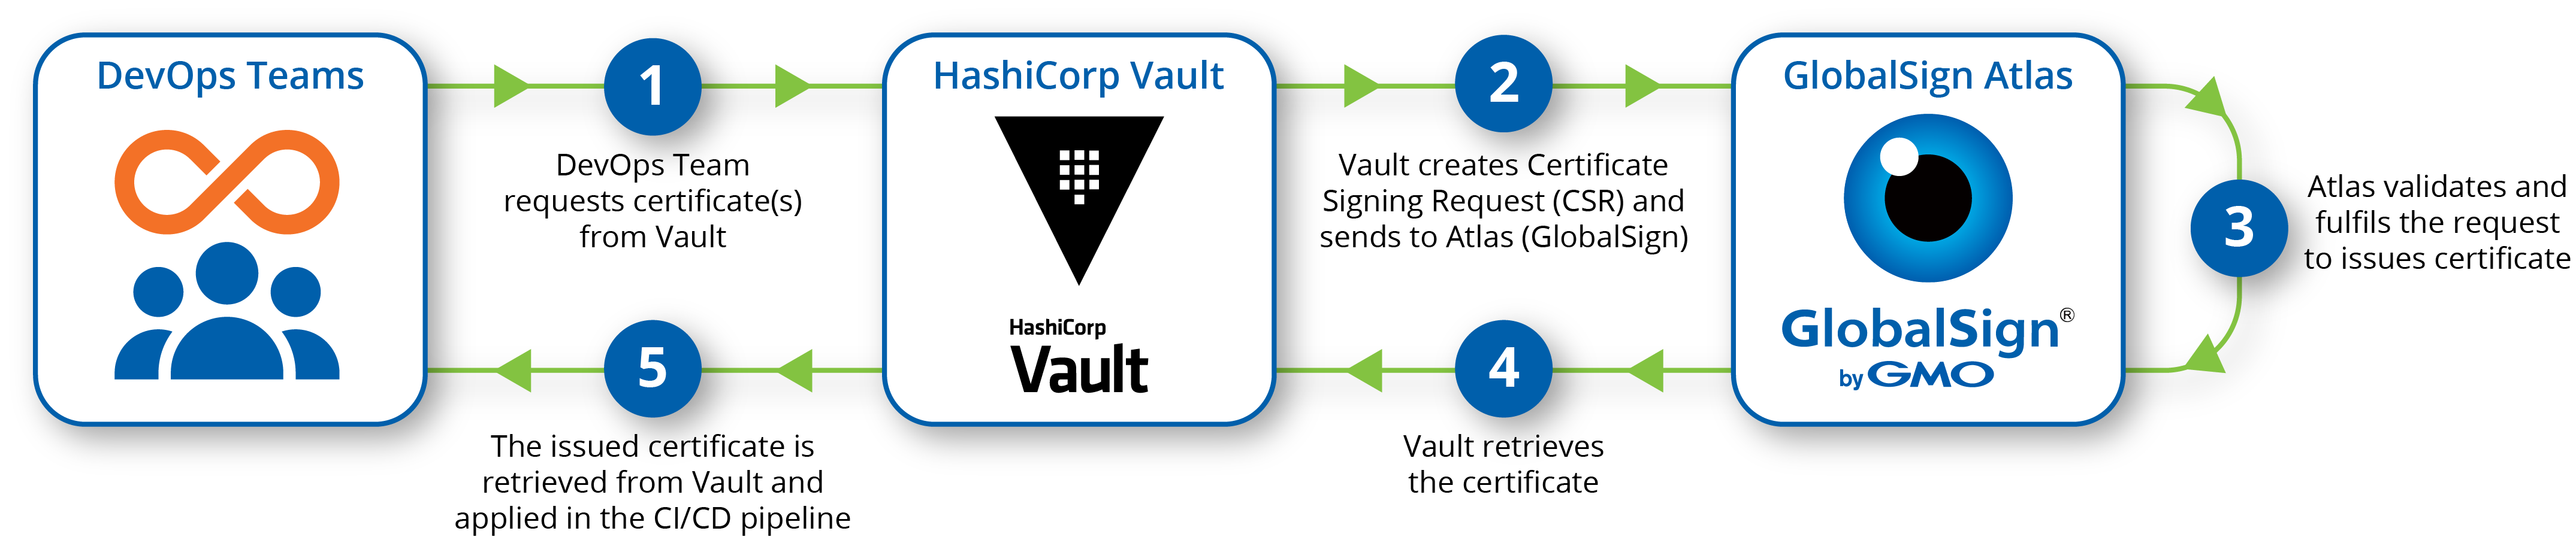 diagram_Hashicorp Vault How it Works.png